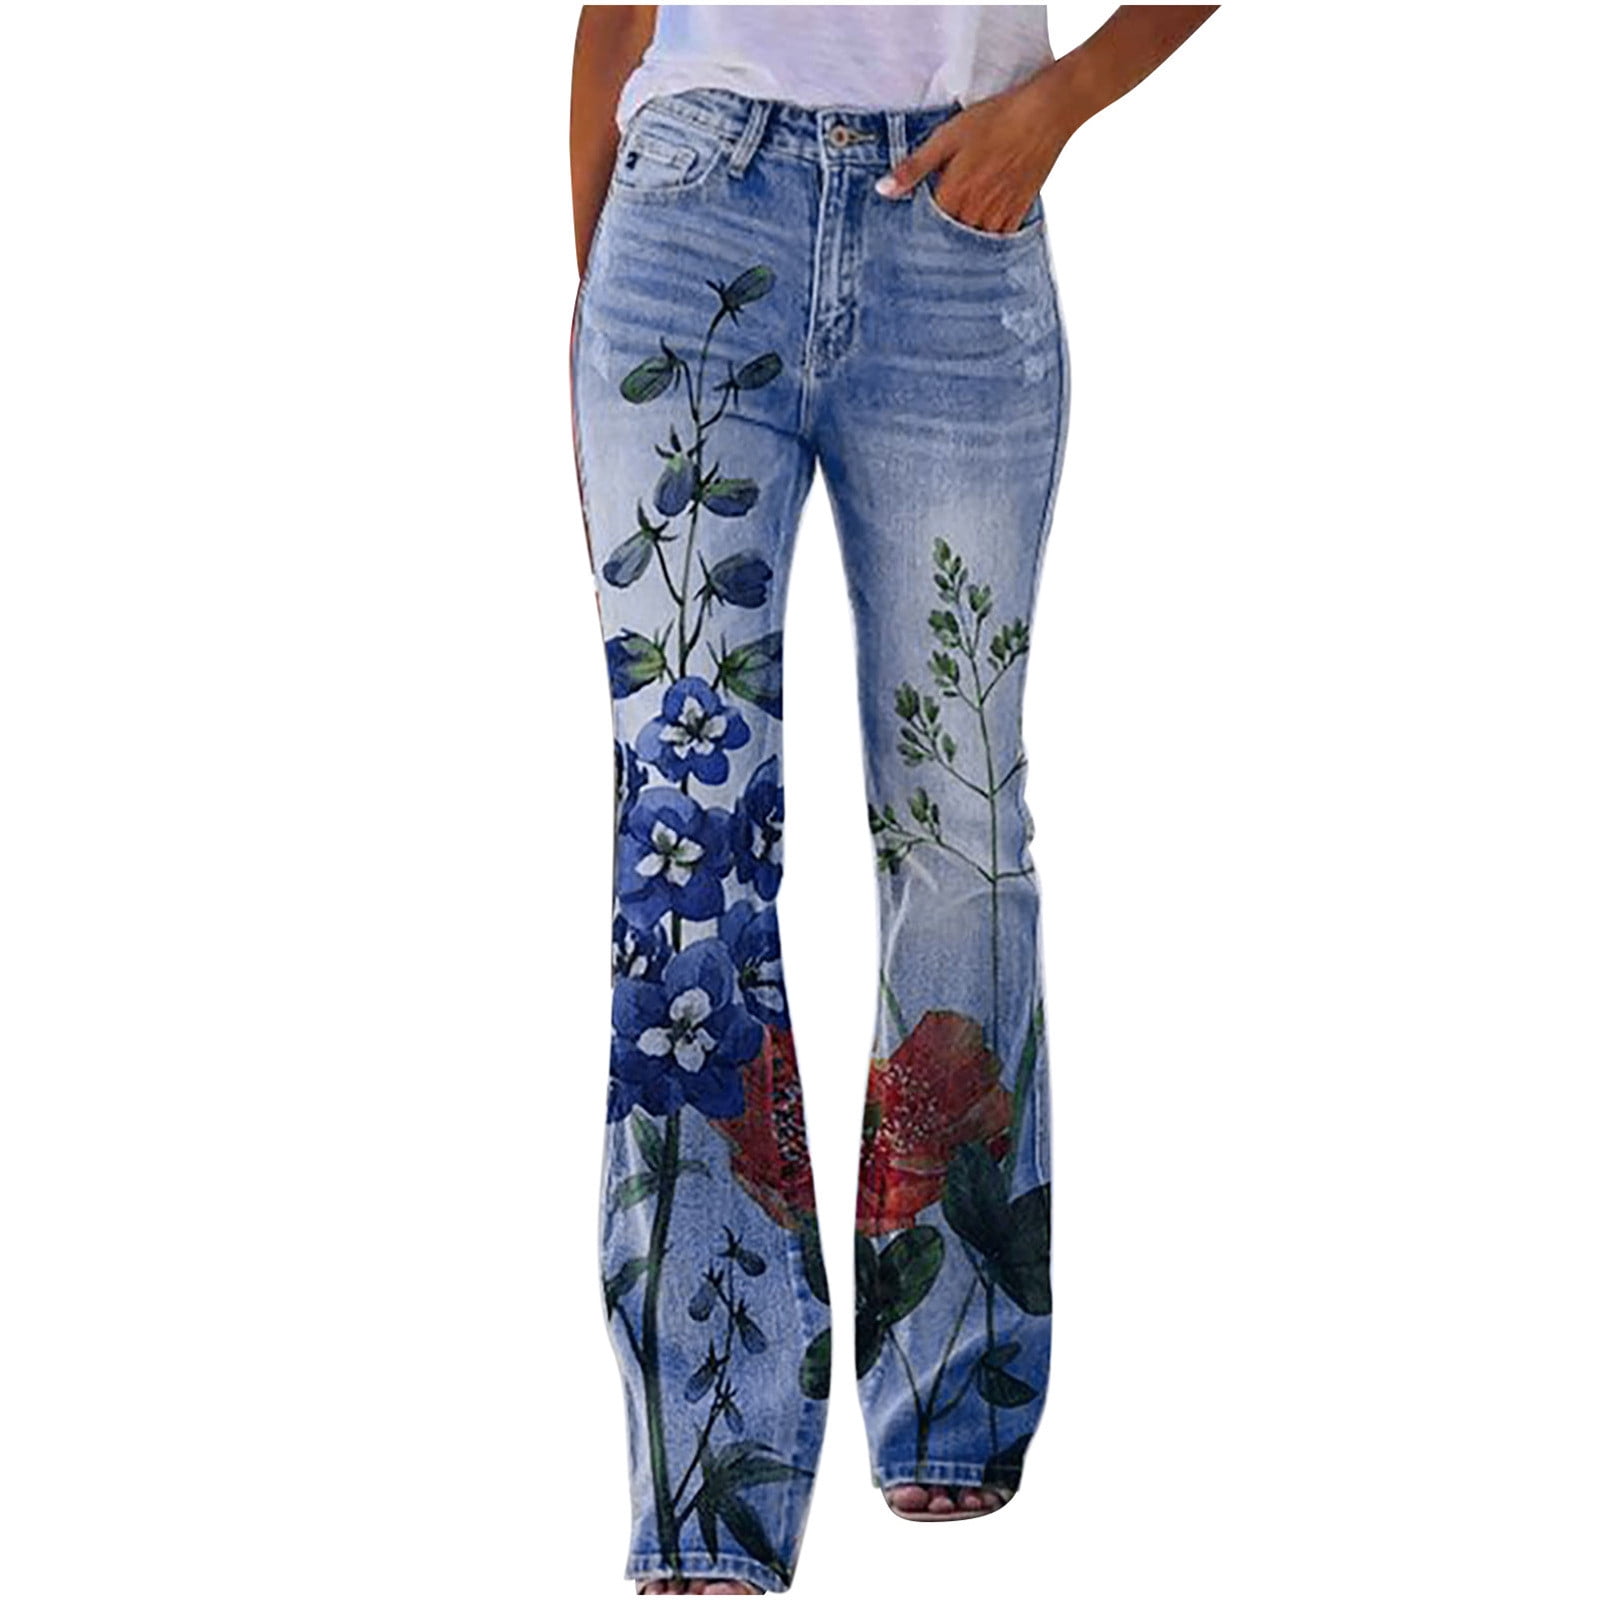 YWDJ Womens Jeans High Waisted Wide Leg Skinny Fitted Denim Elastic Waist  Printed Stretchy Long Pant Stretch Buttons Thin Stretch Pants Trousers A  Choice for Outings Work Going Out 26-Yellow XXL 